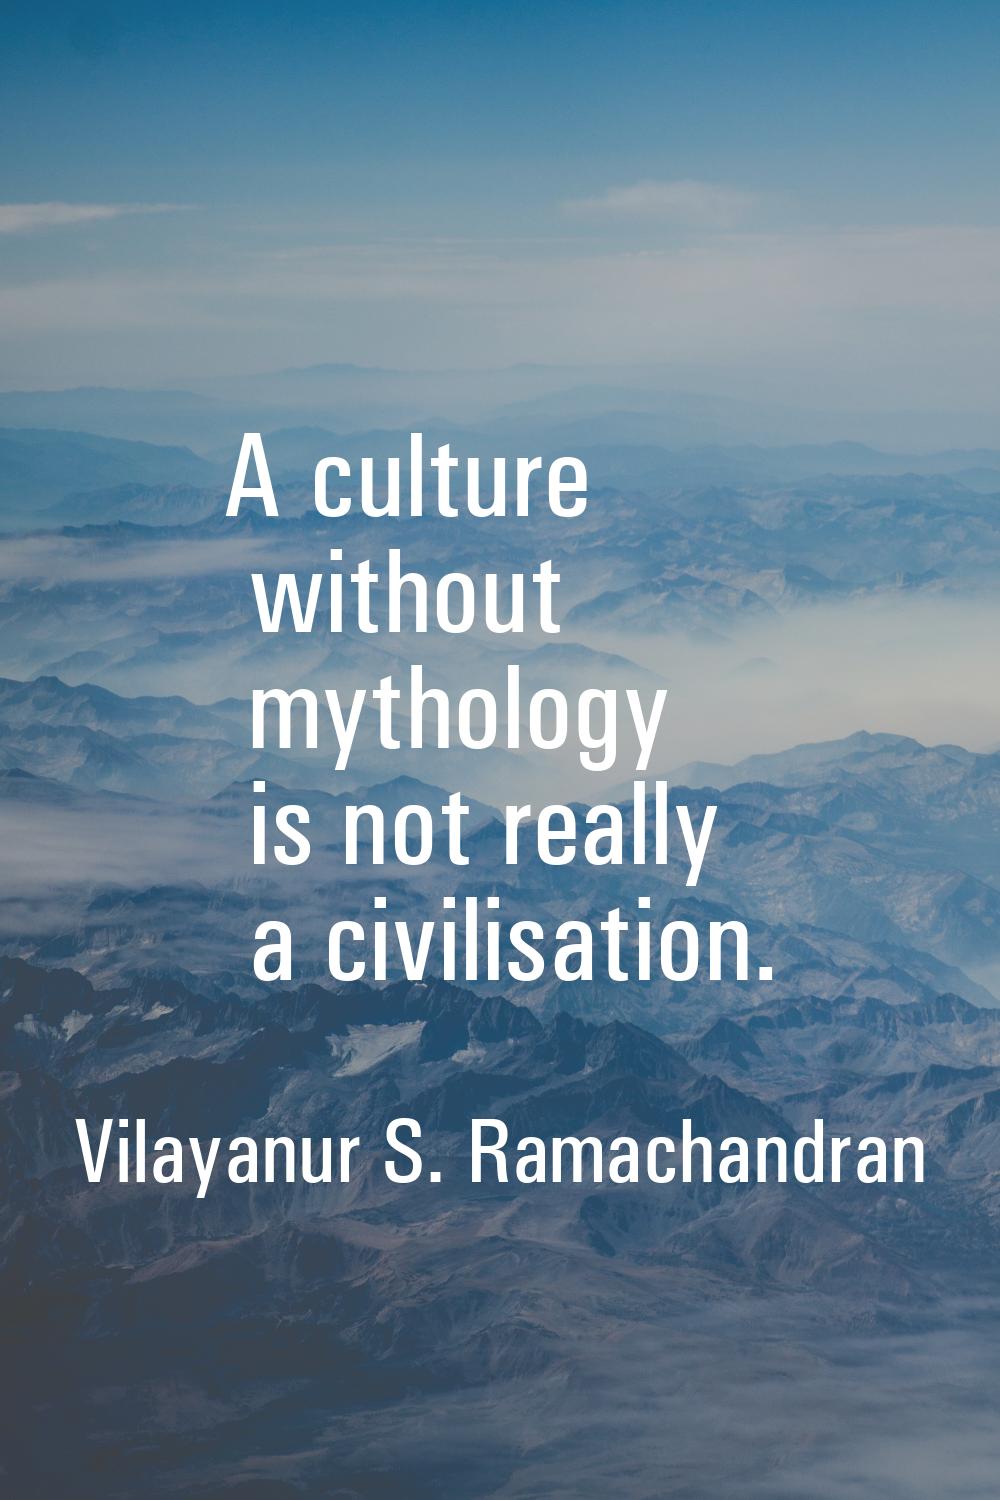 A culture without mythology is not really a civilisation.